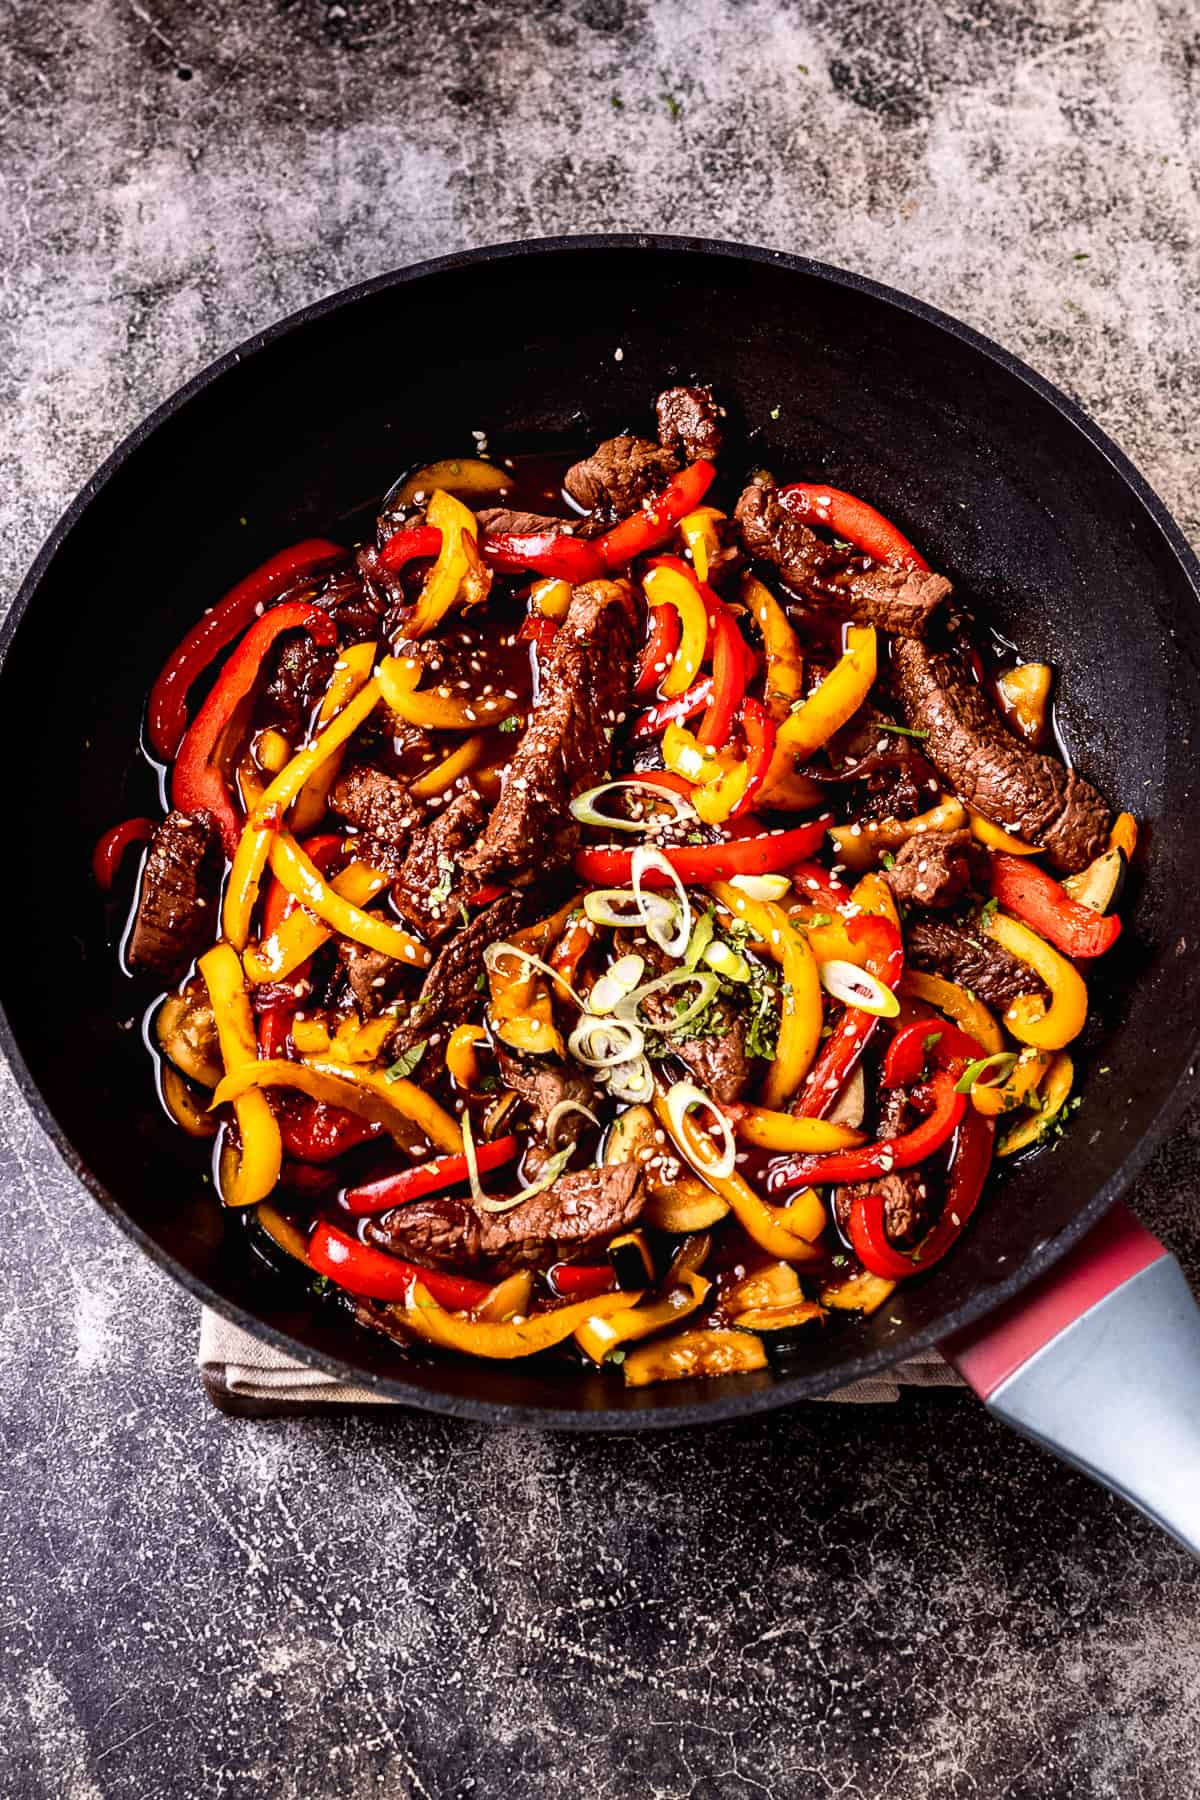 Beef stir fry with sauce in a wok.